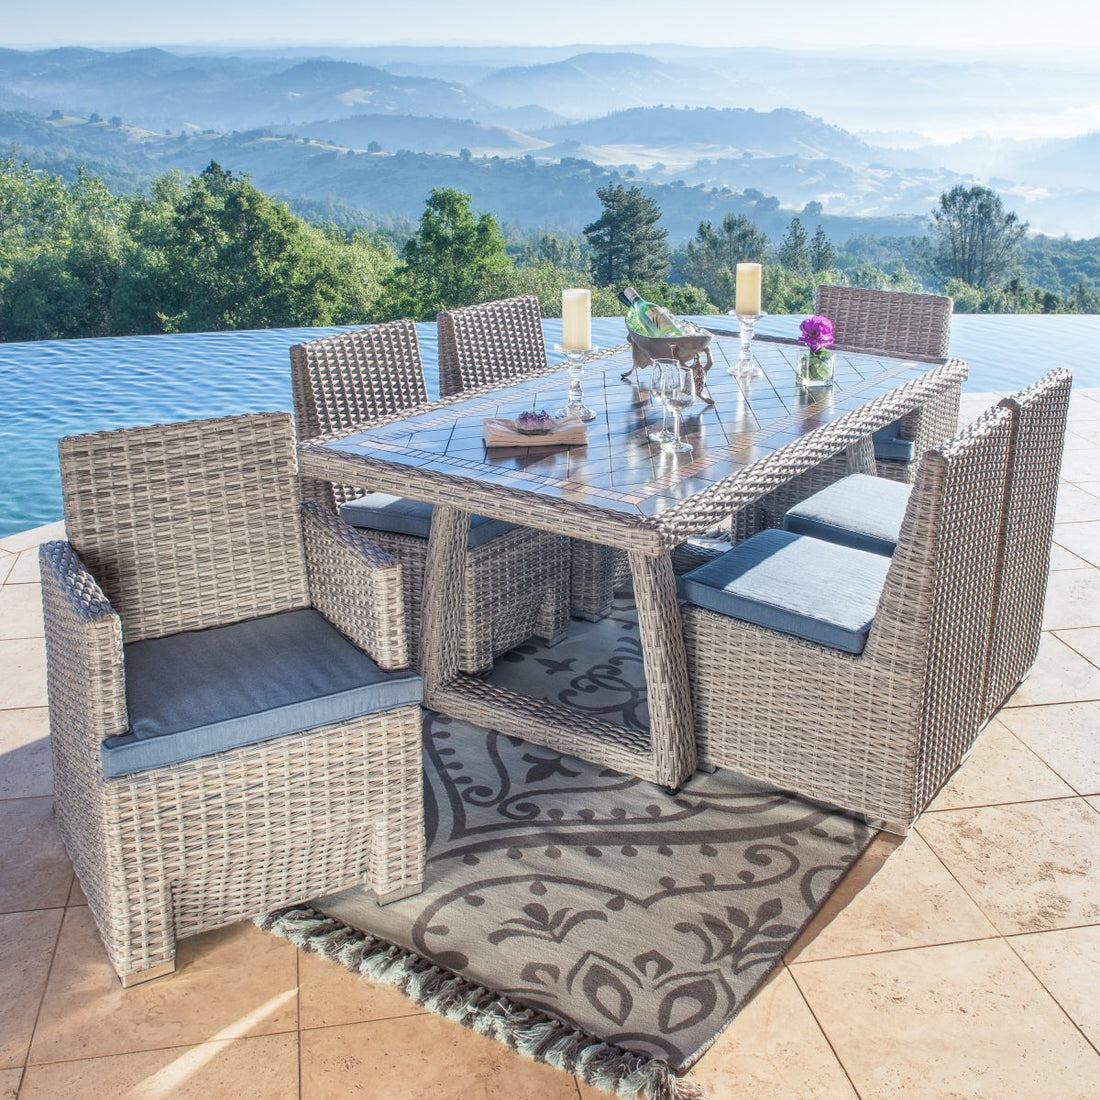 A Guide to Picking the Best Outdoor Dining Set for Your Backyard